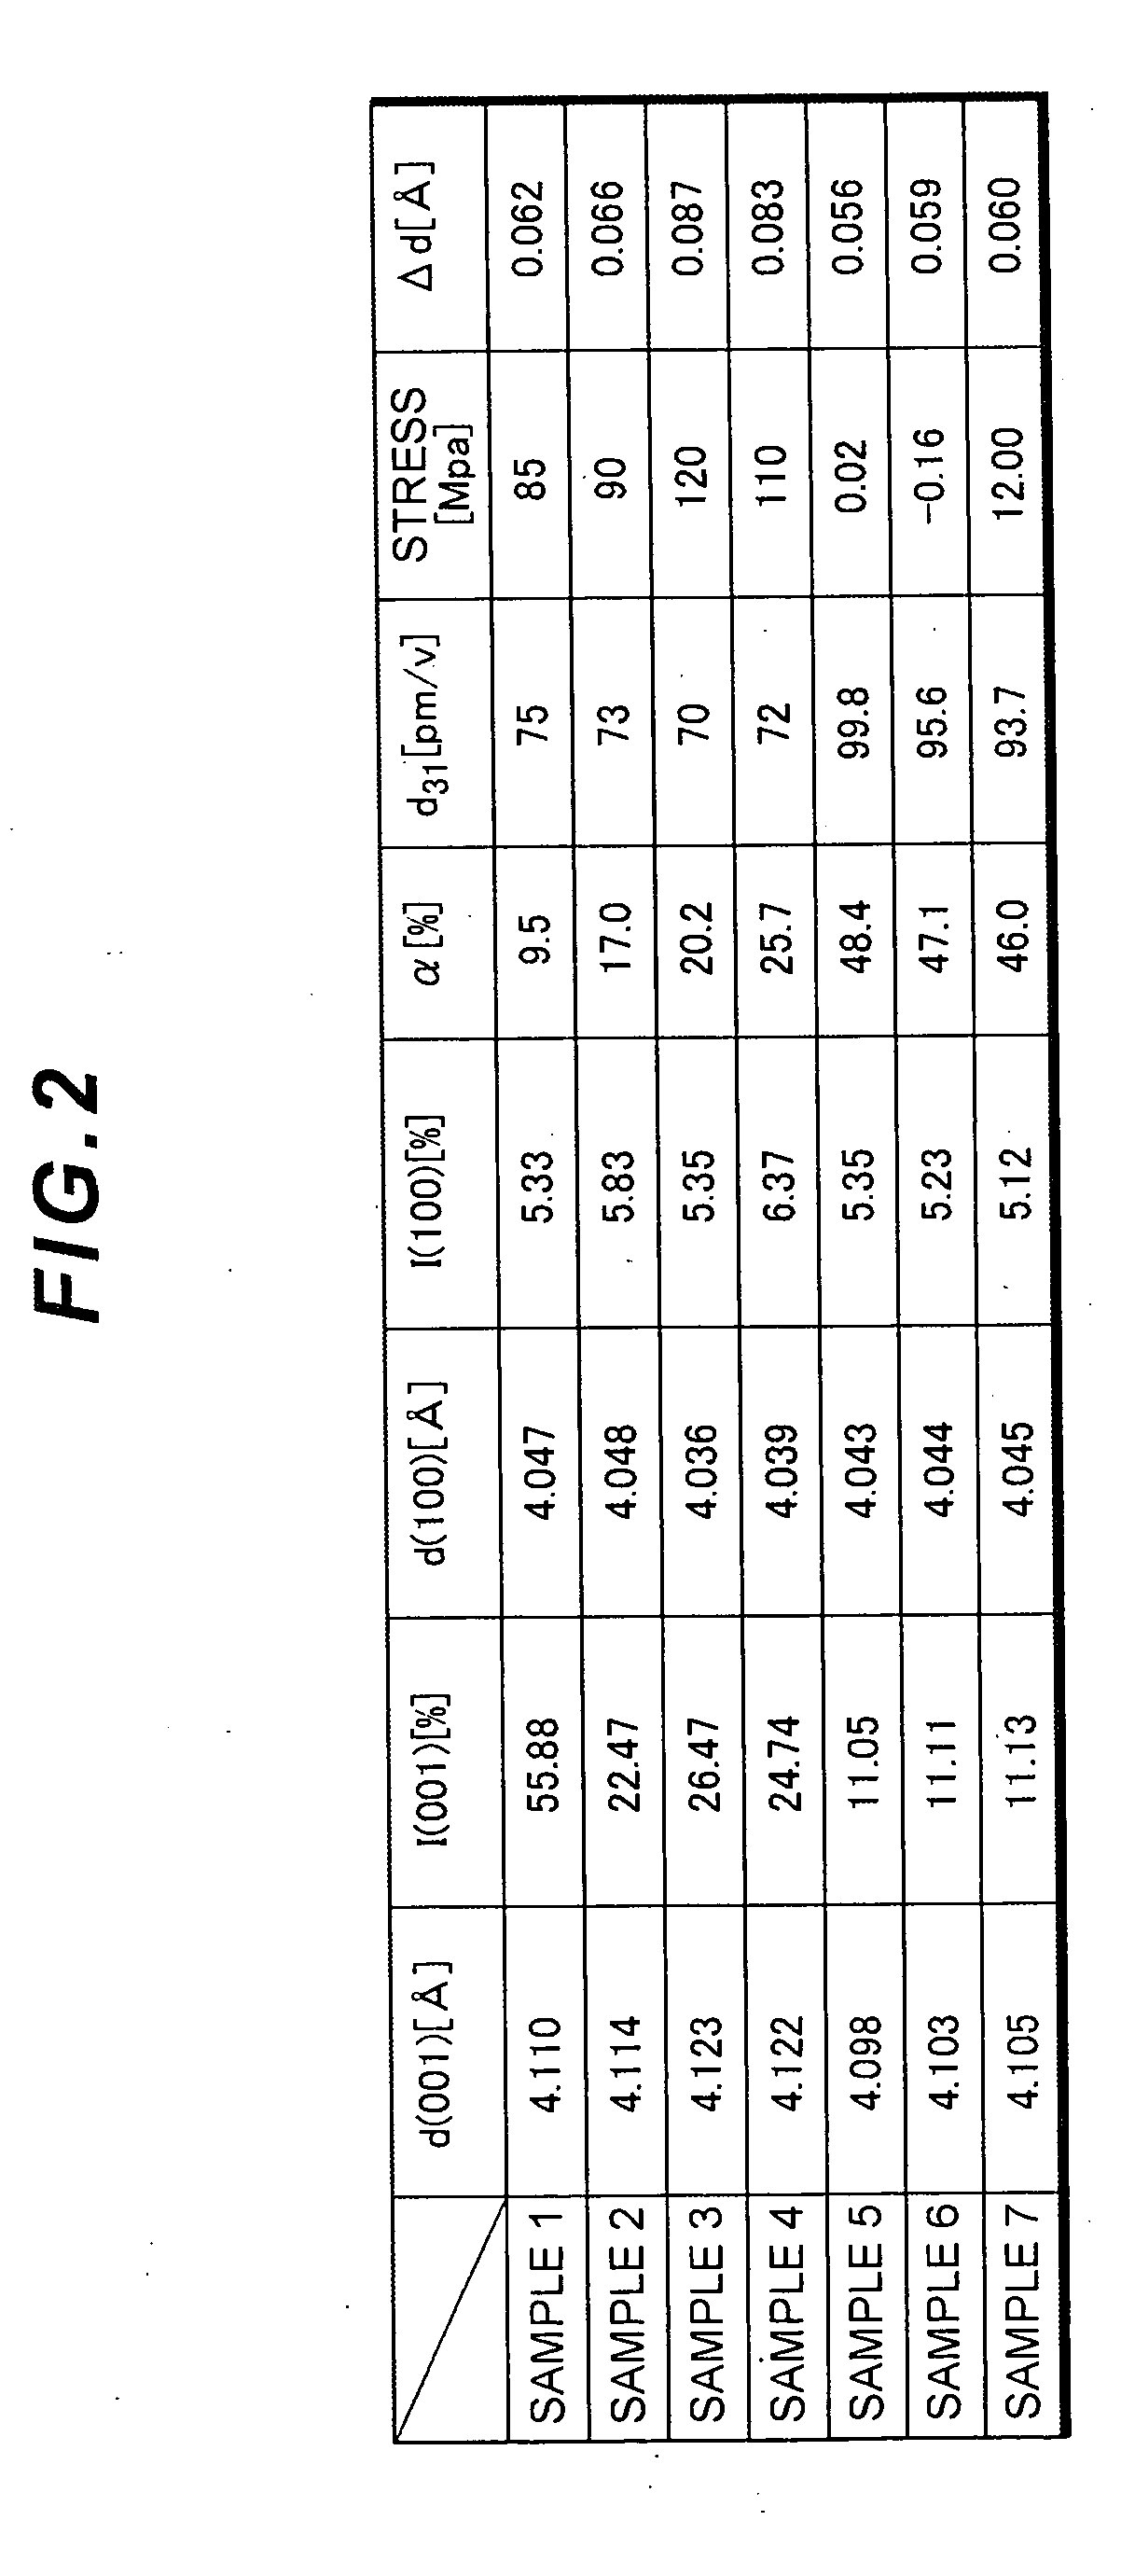 Piezoelectric element and gyroscope